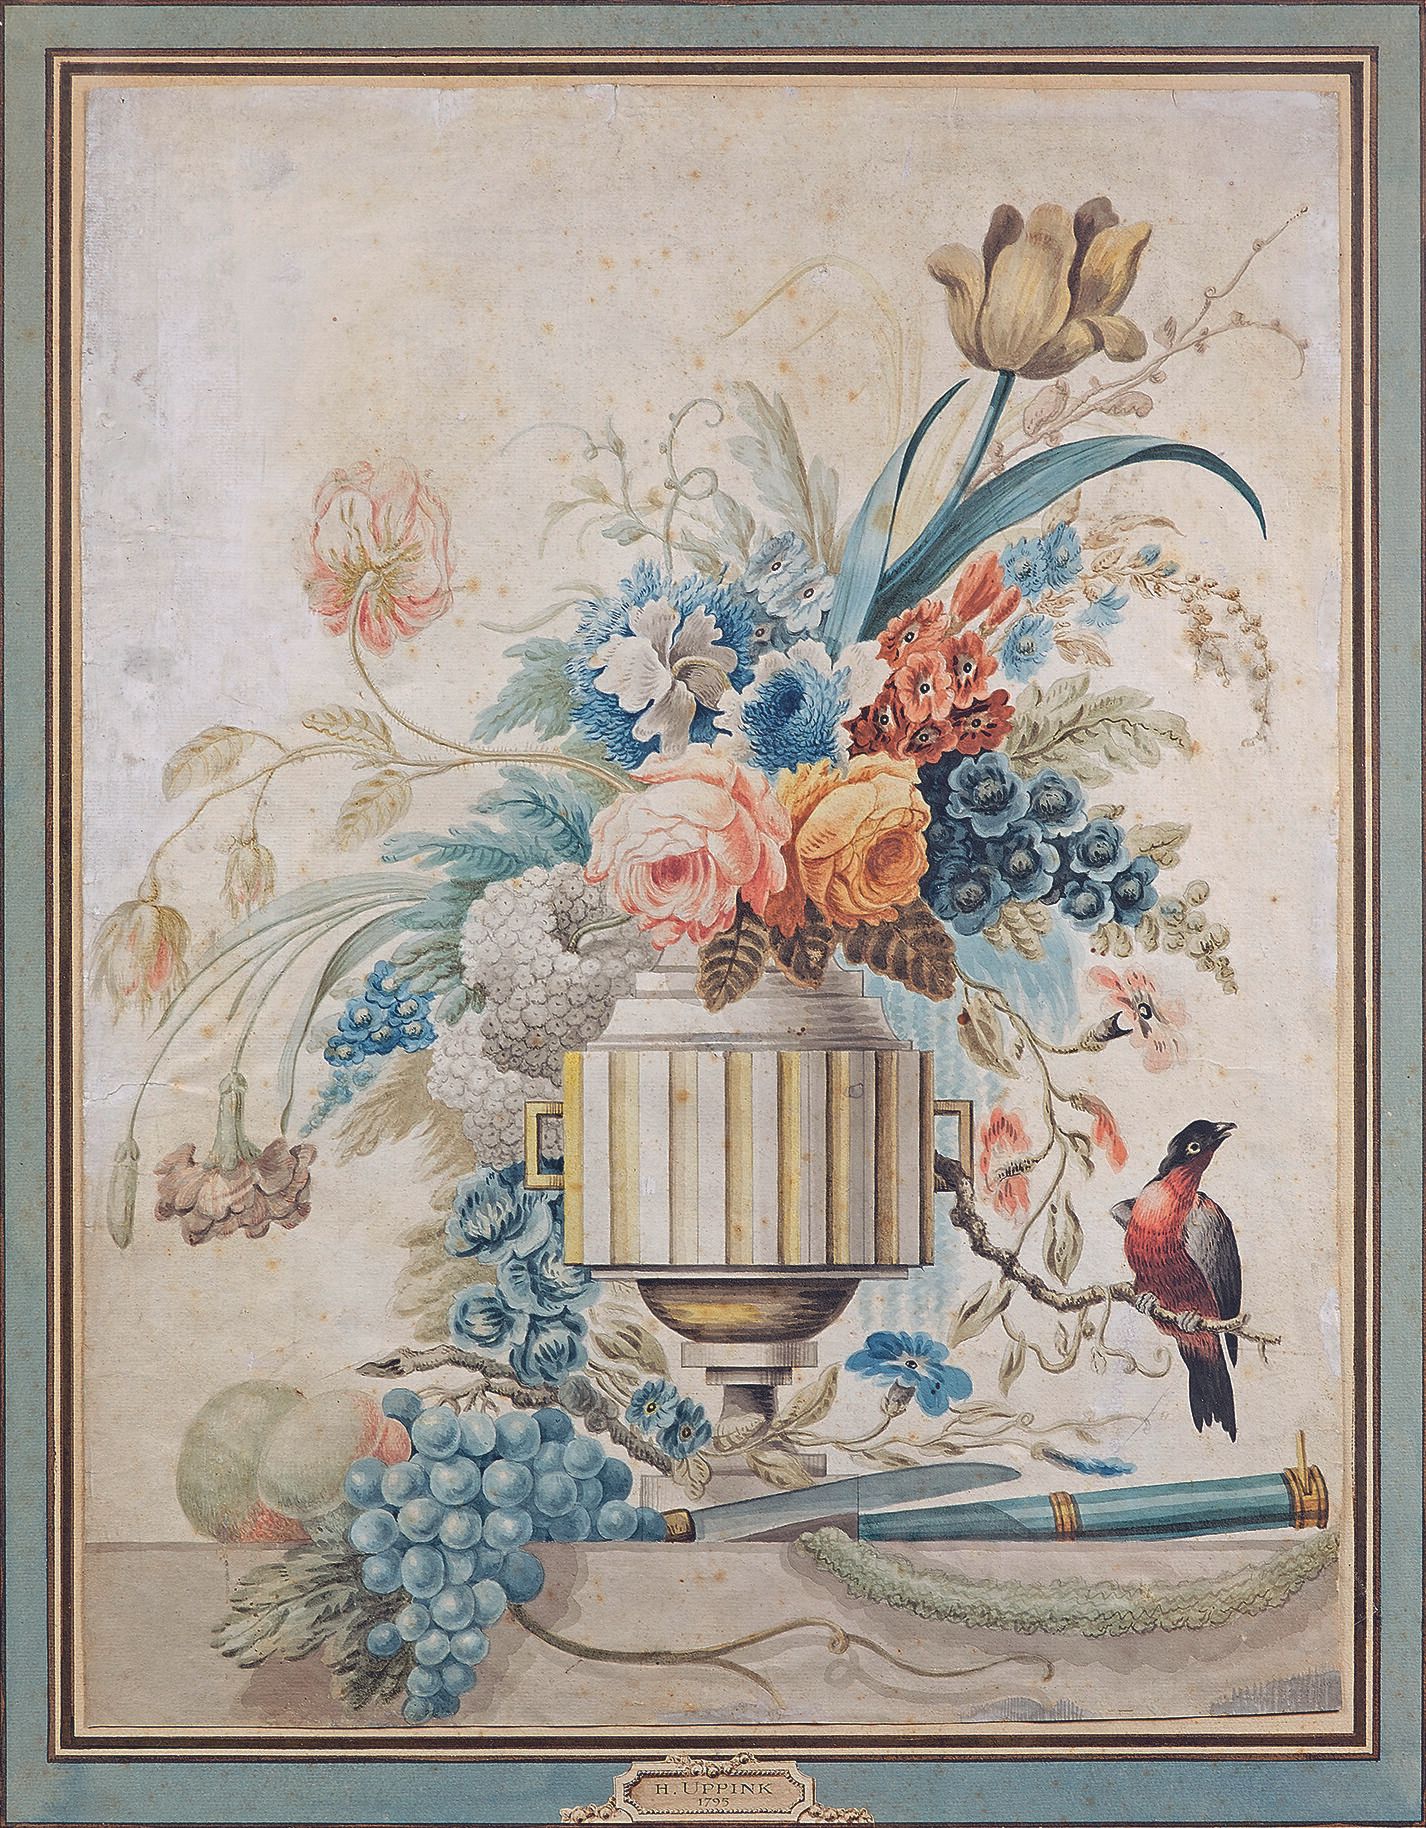 Null Attributed to Hermonius UPPINK (1753-1793)
Bouquet of flowers in a vase
Bla&hellip;